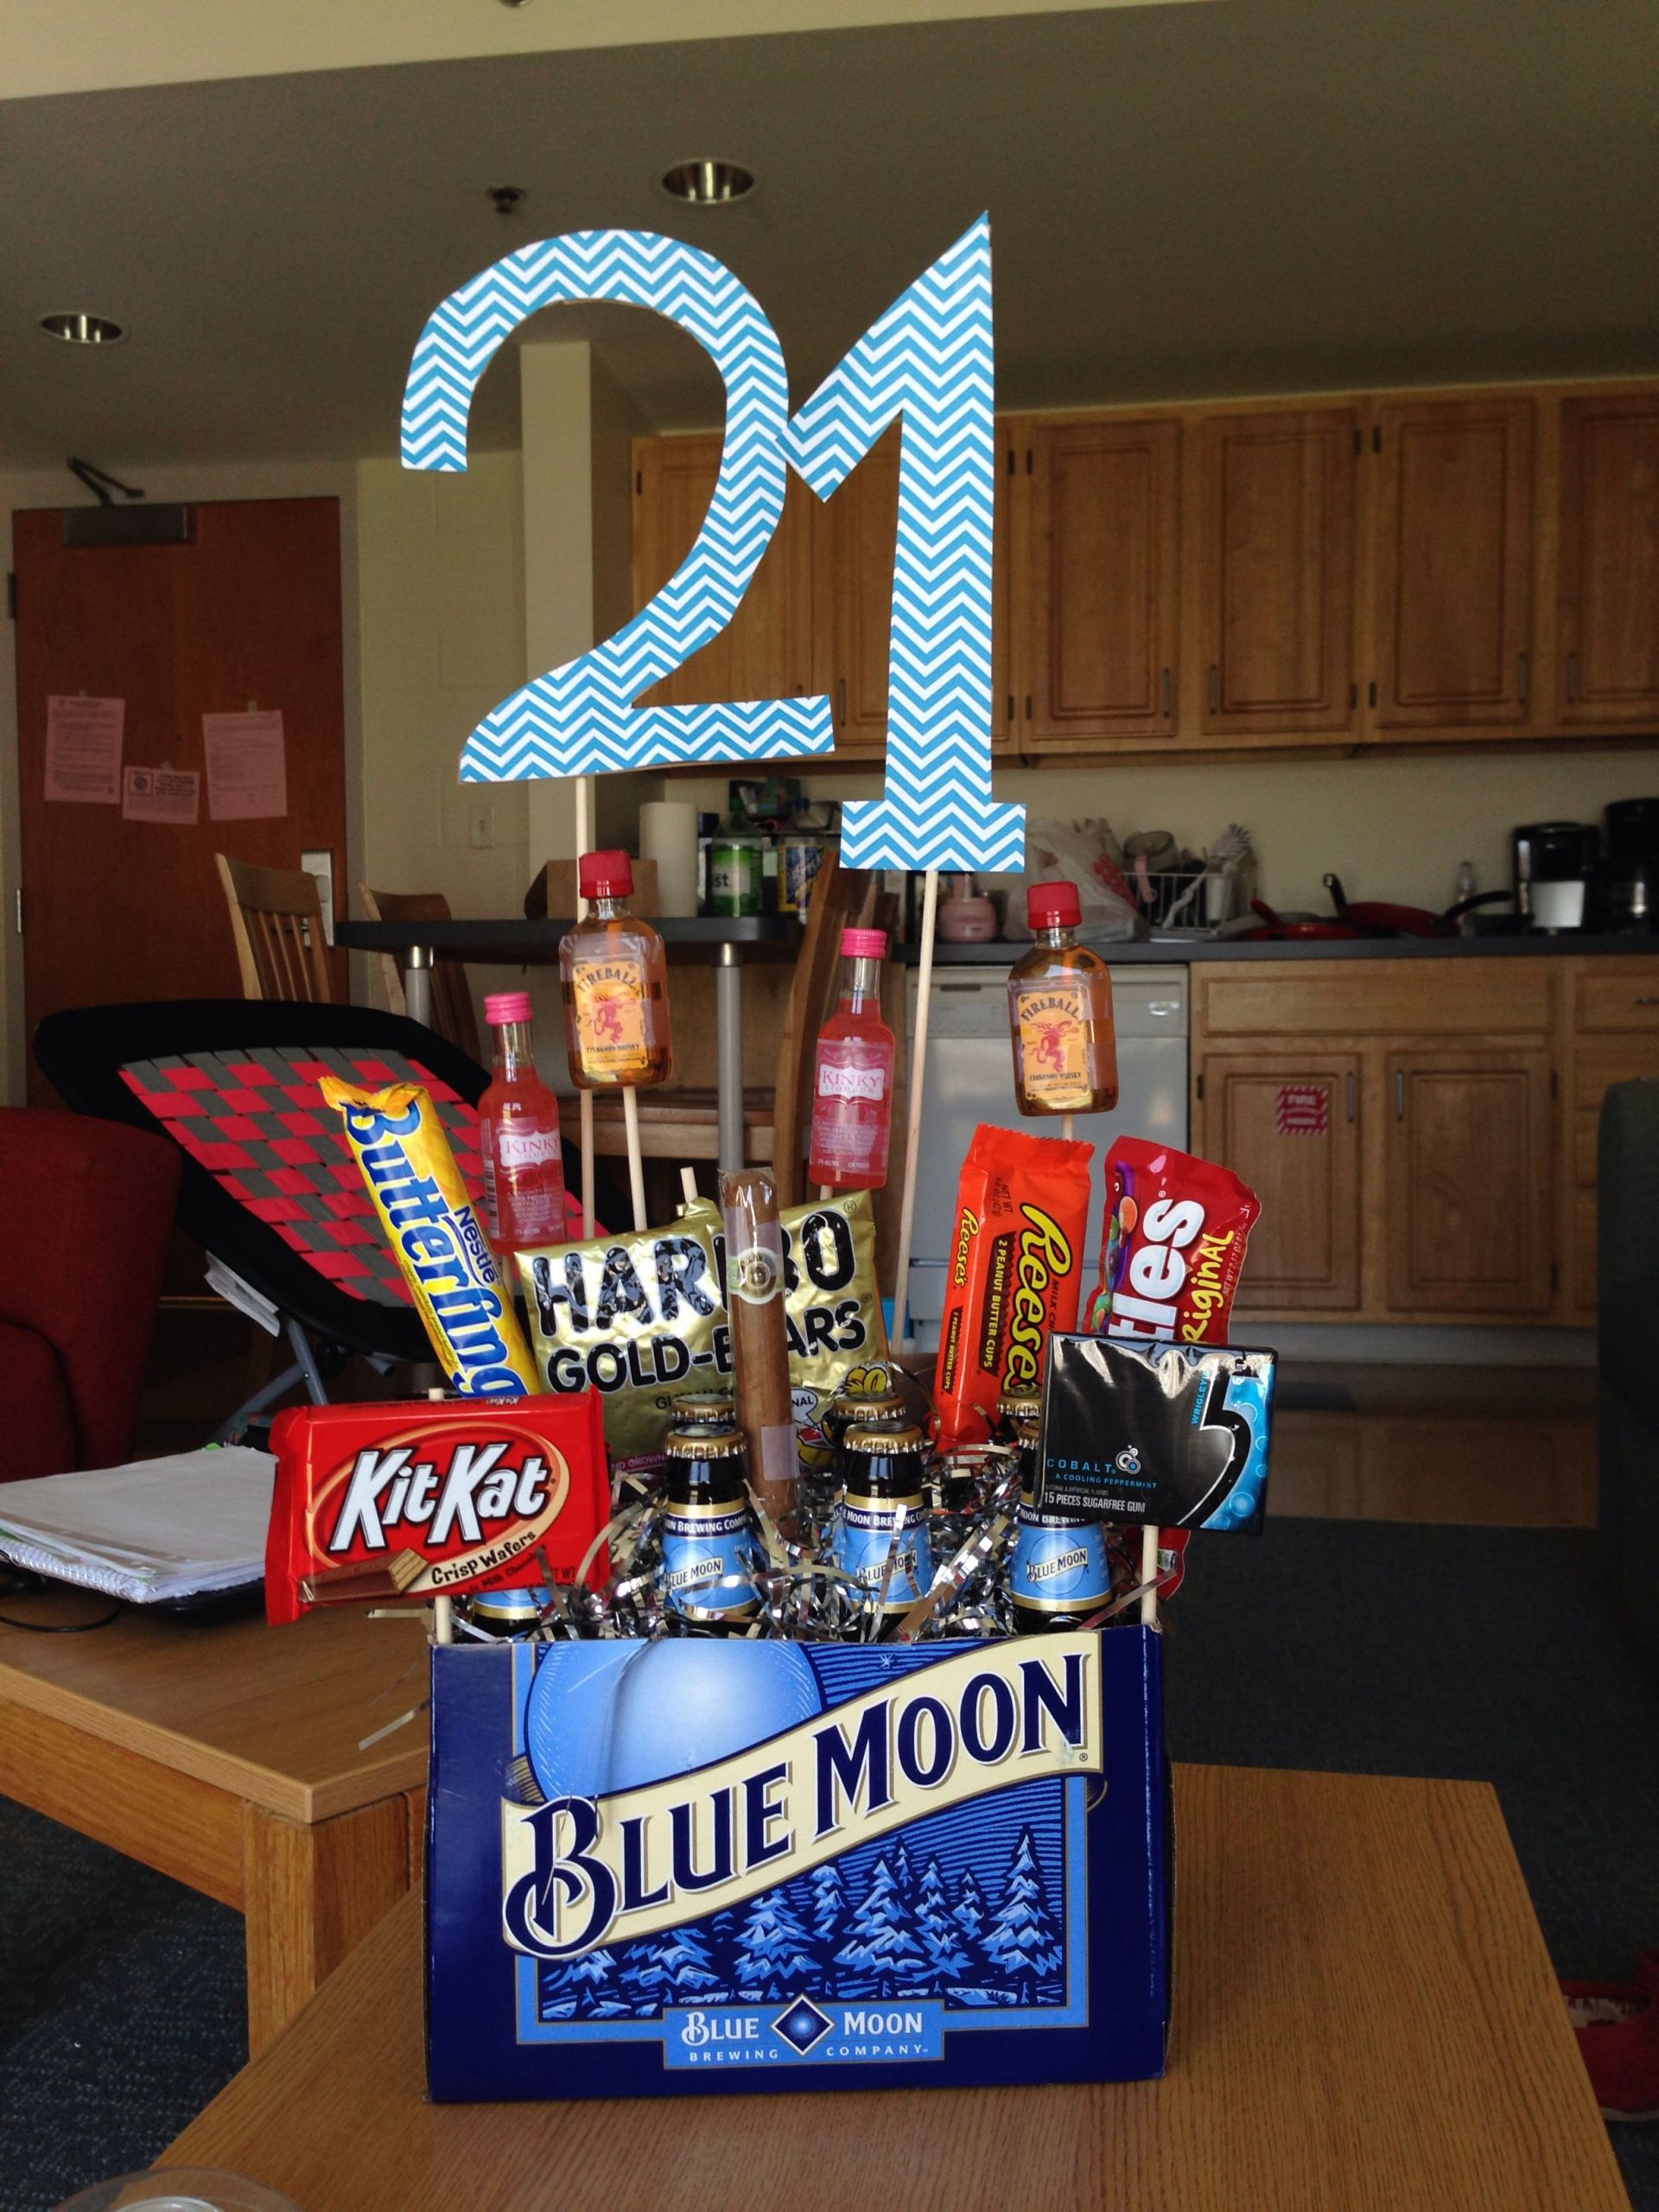 21 Birthday Gift Ideas For Him
 Can t believe hes 21 this year love this idea as